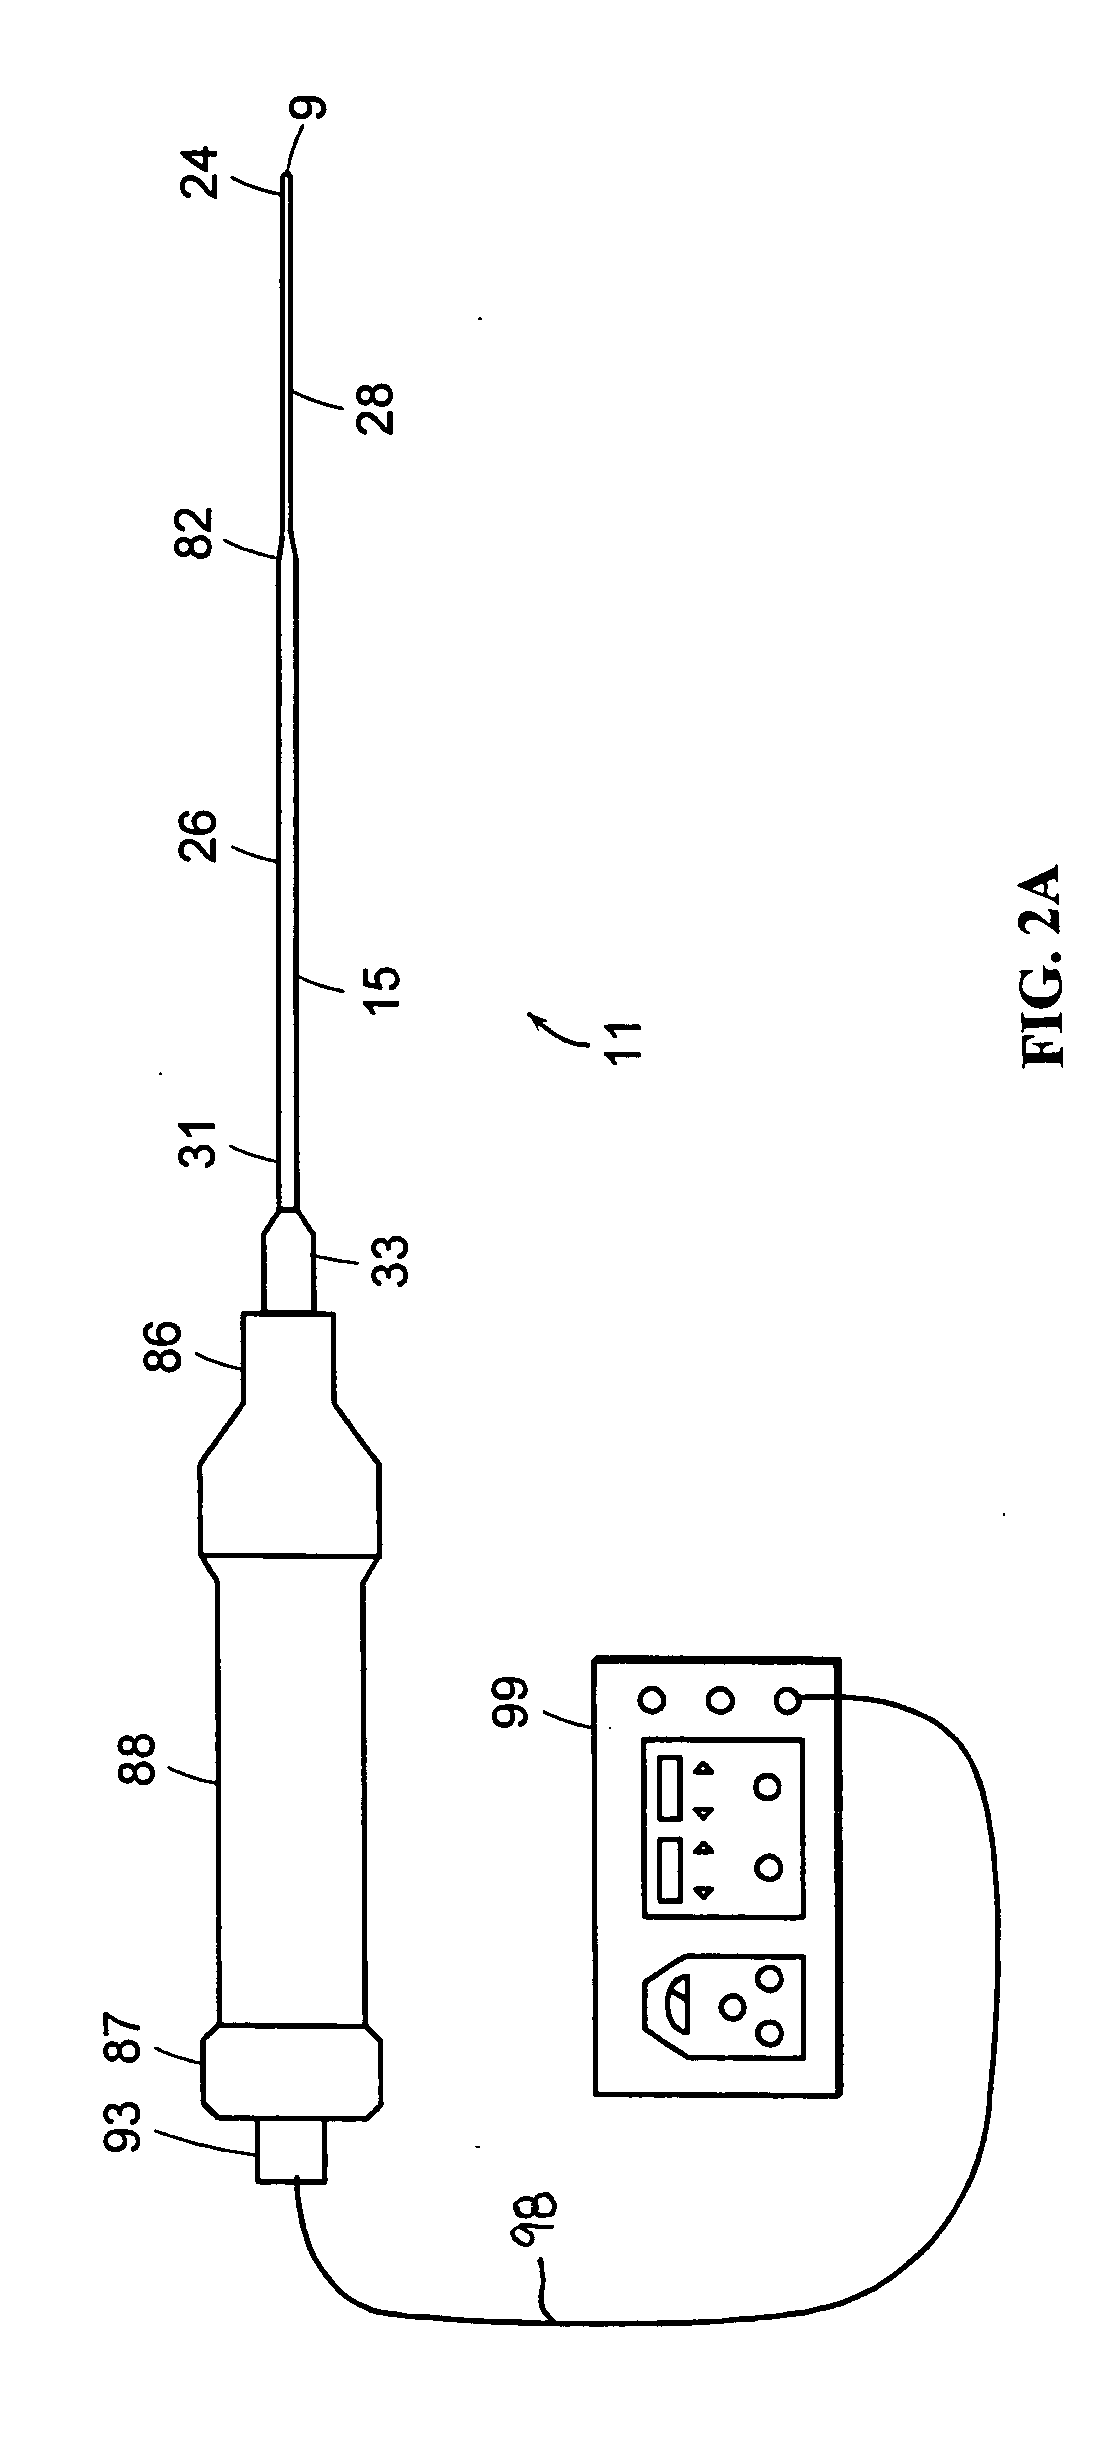 Apparatus and method for an ultrasonic medical device having a probe with a small proximal end